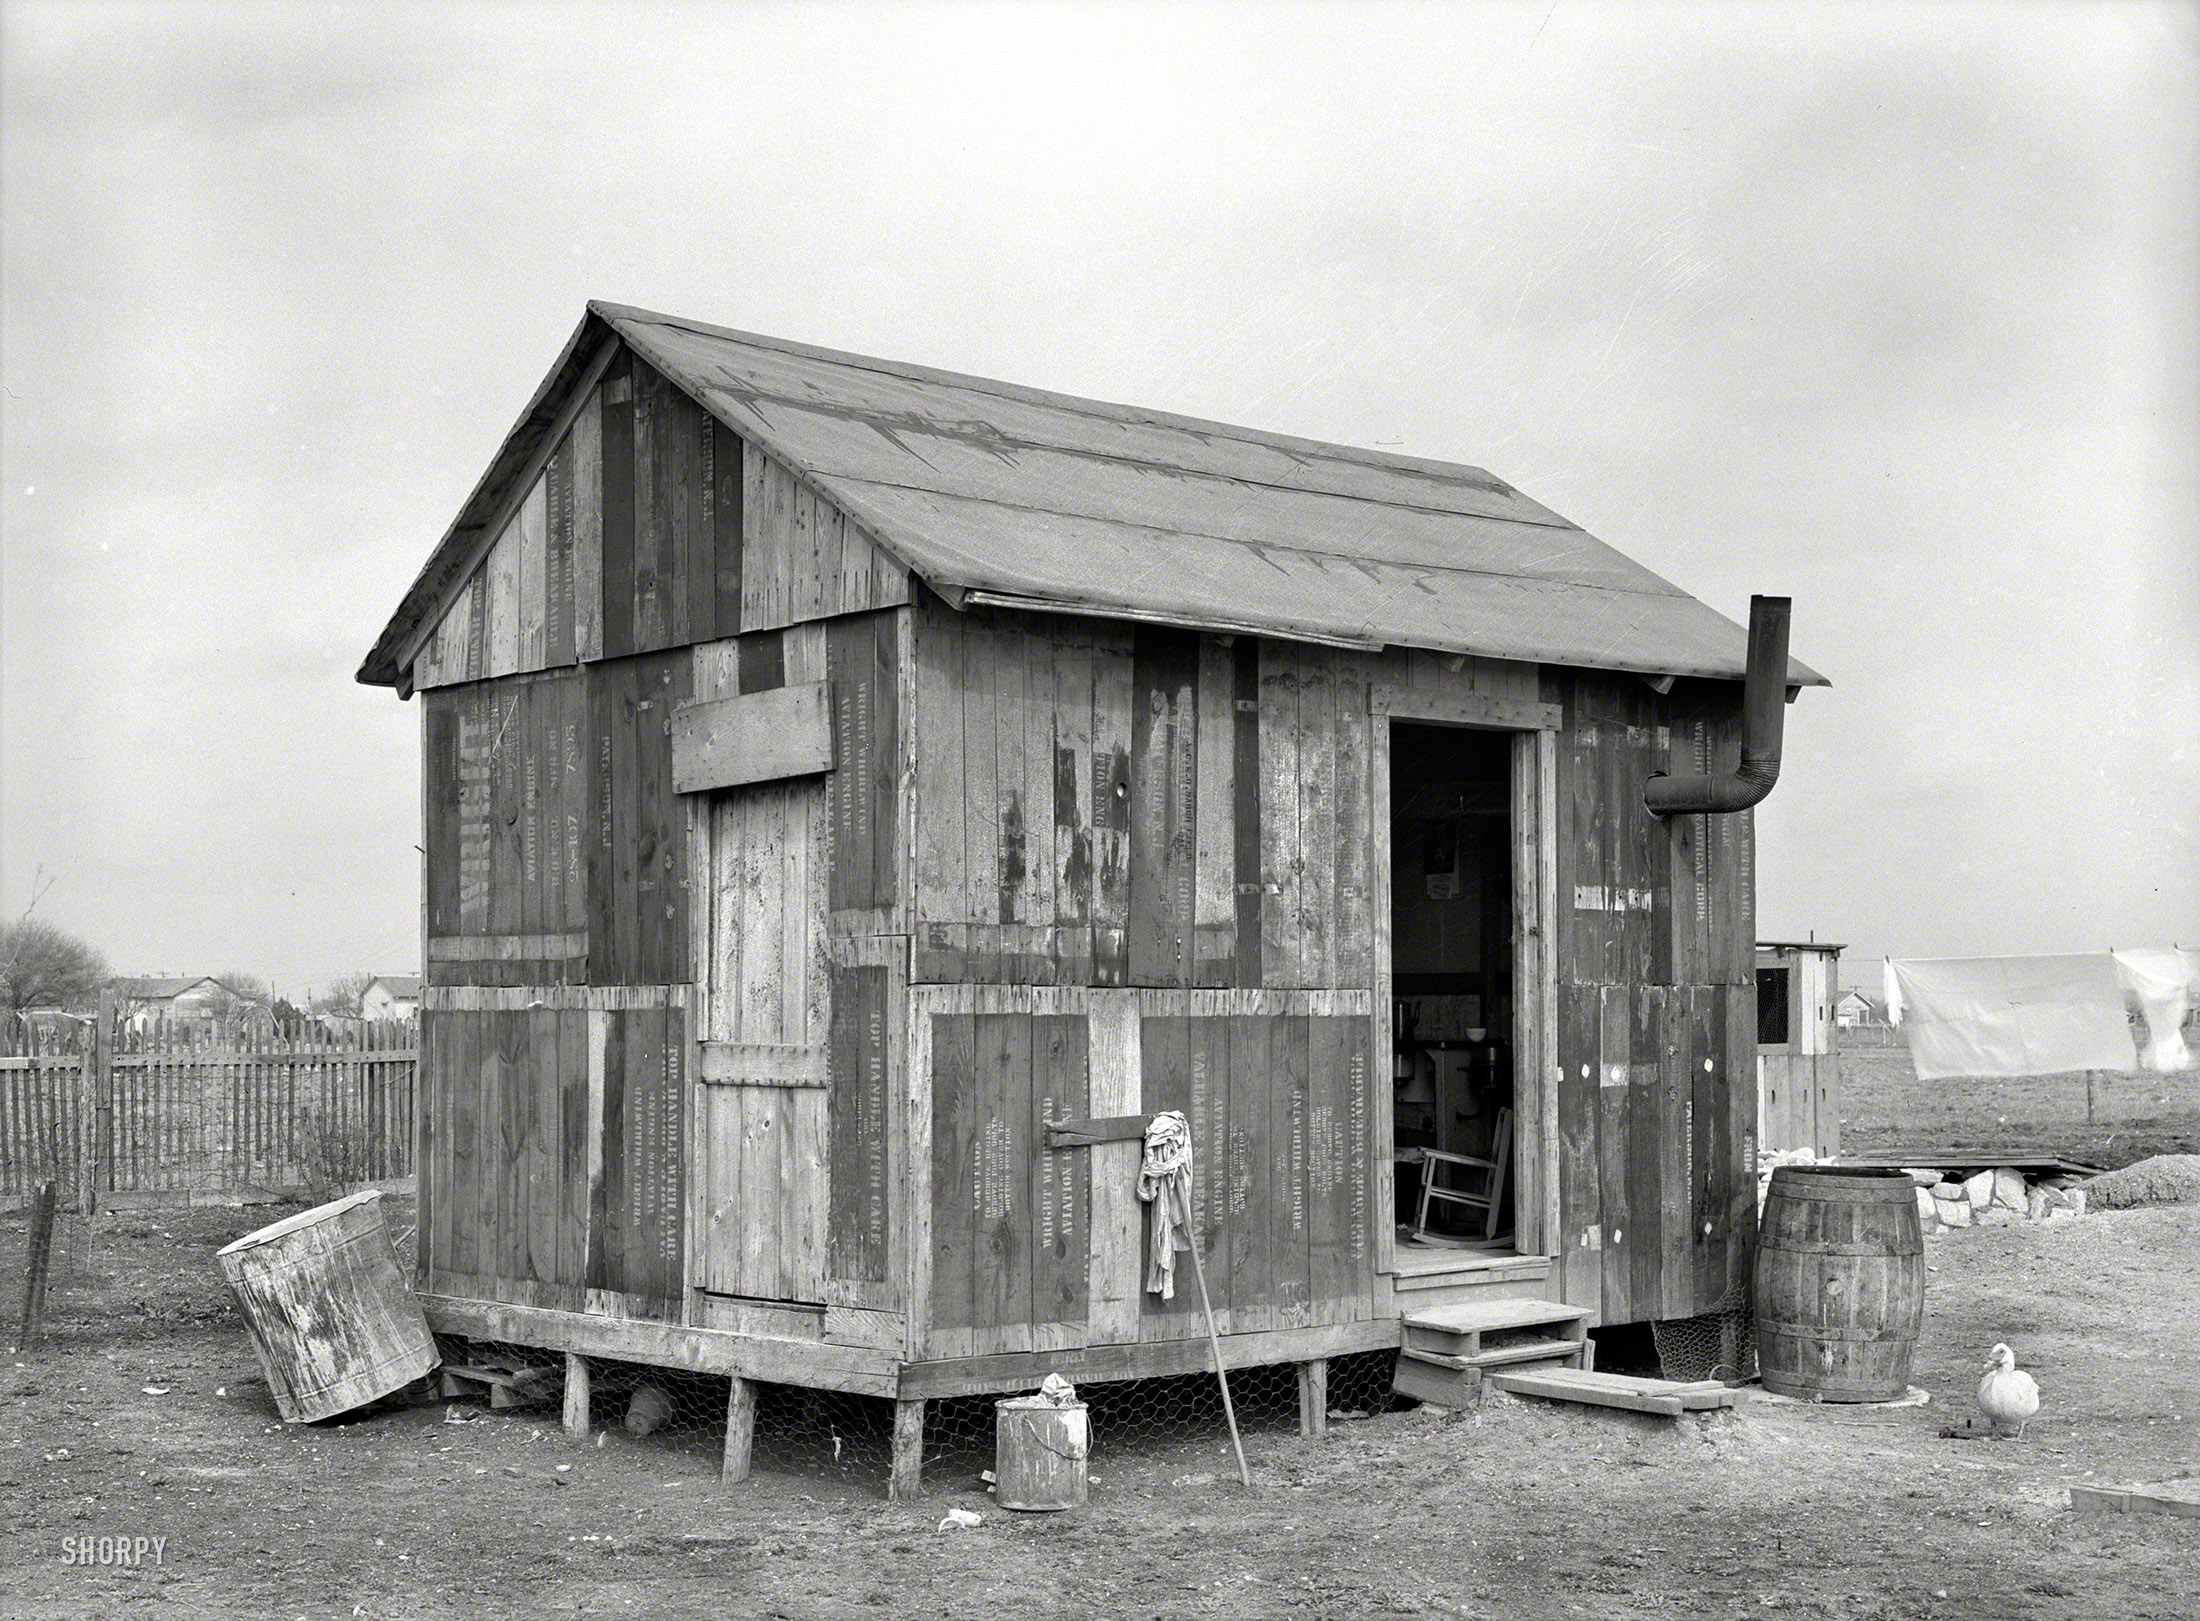 March 1939. "House in Mexican section made of discarded airplane engine crates. San Antonio, Texas." Note feathered mascot. Medium-format nitrate negative by Russell Lee for the Resettlement Administration. View full size.